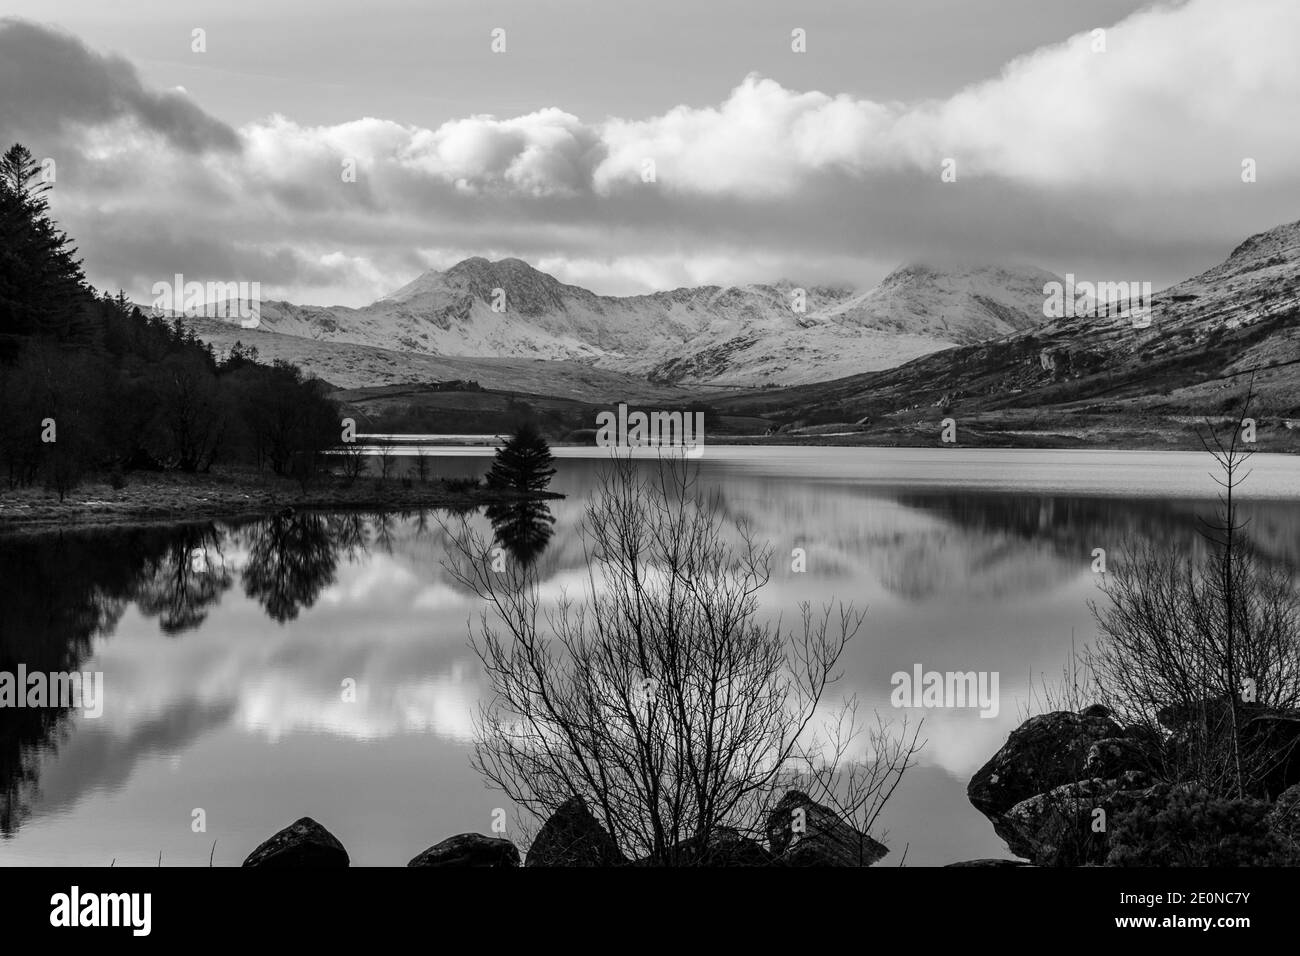 Looking down Llynnau Mymbyr lake from Capel Curig towards Snowdon. This lake is situated in the Snowdonia National Park in North Wales. Stock Photo